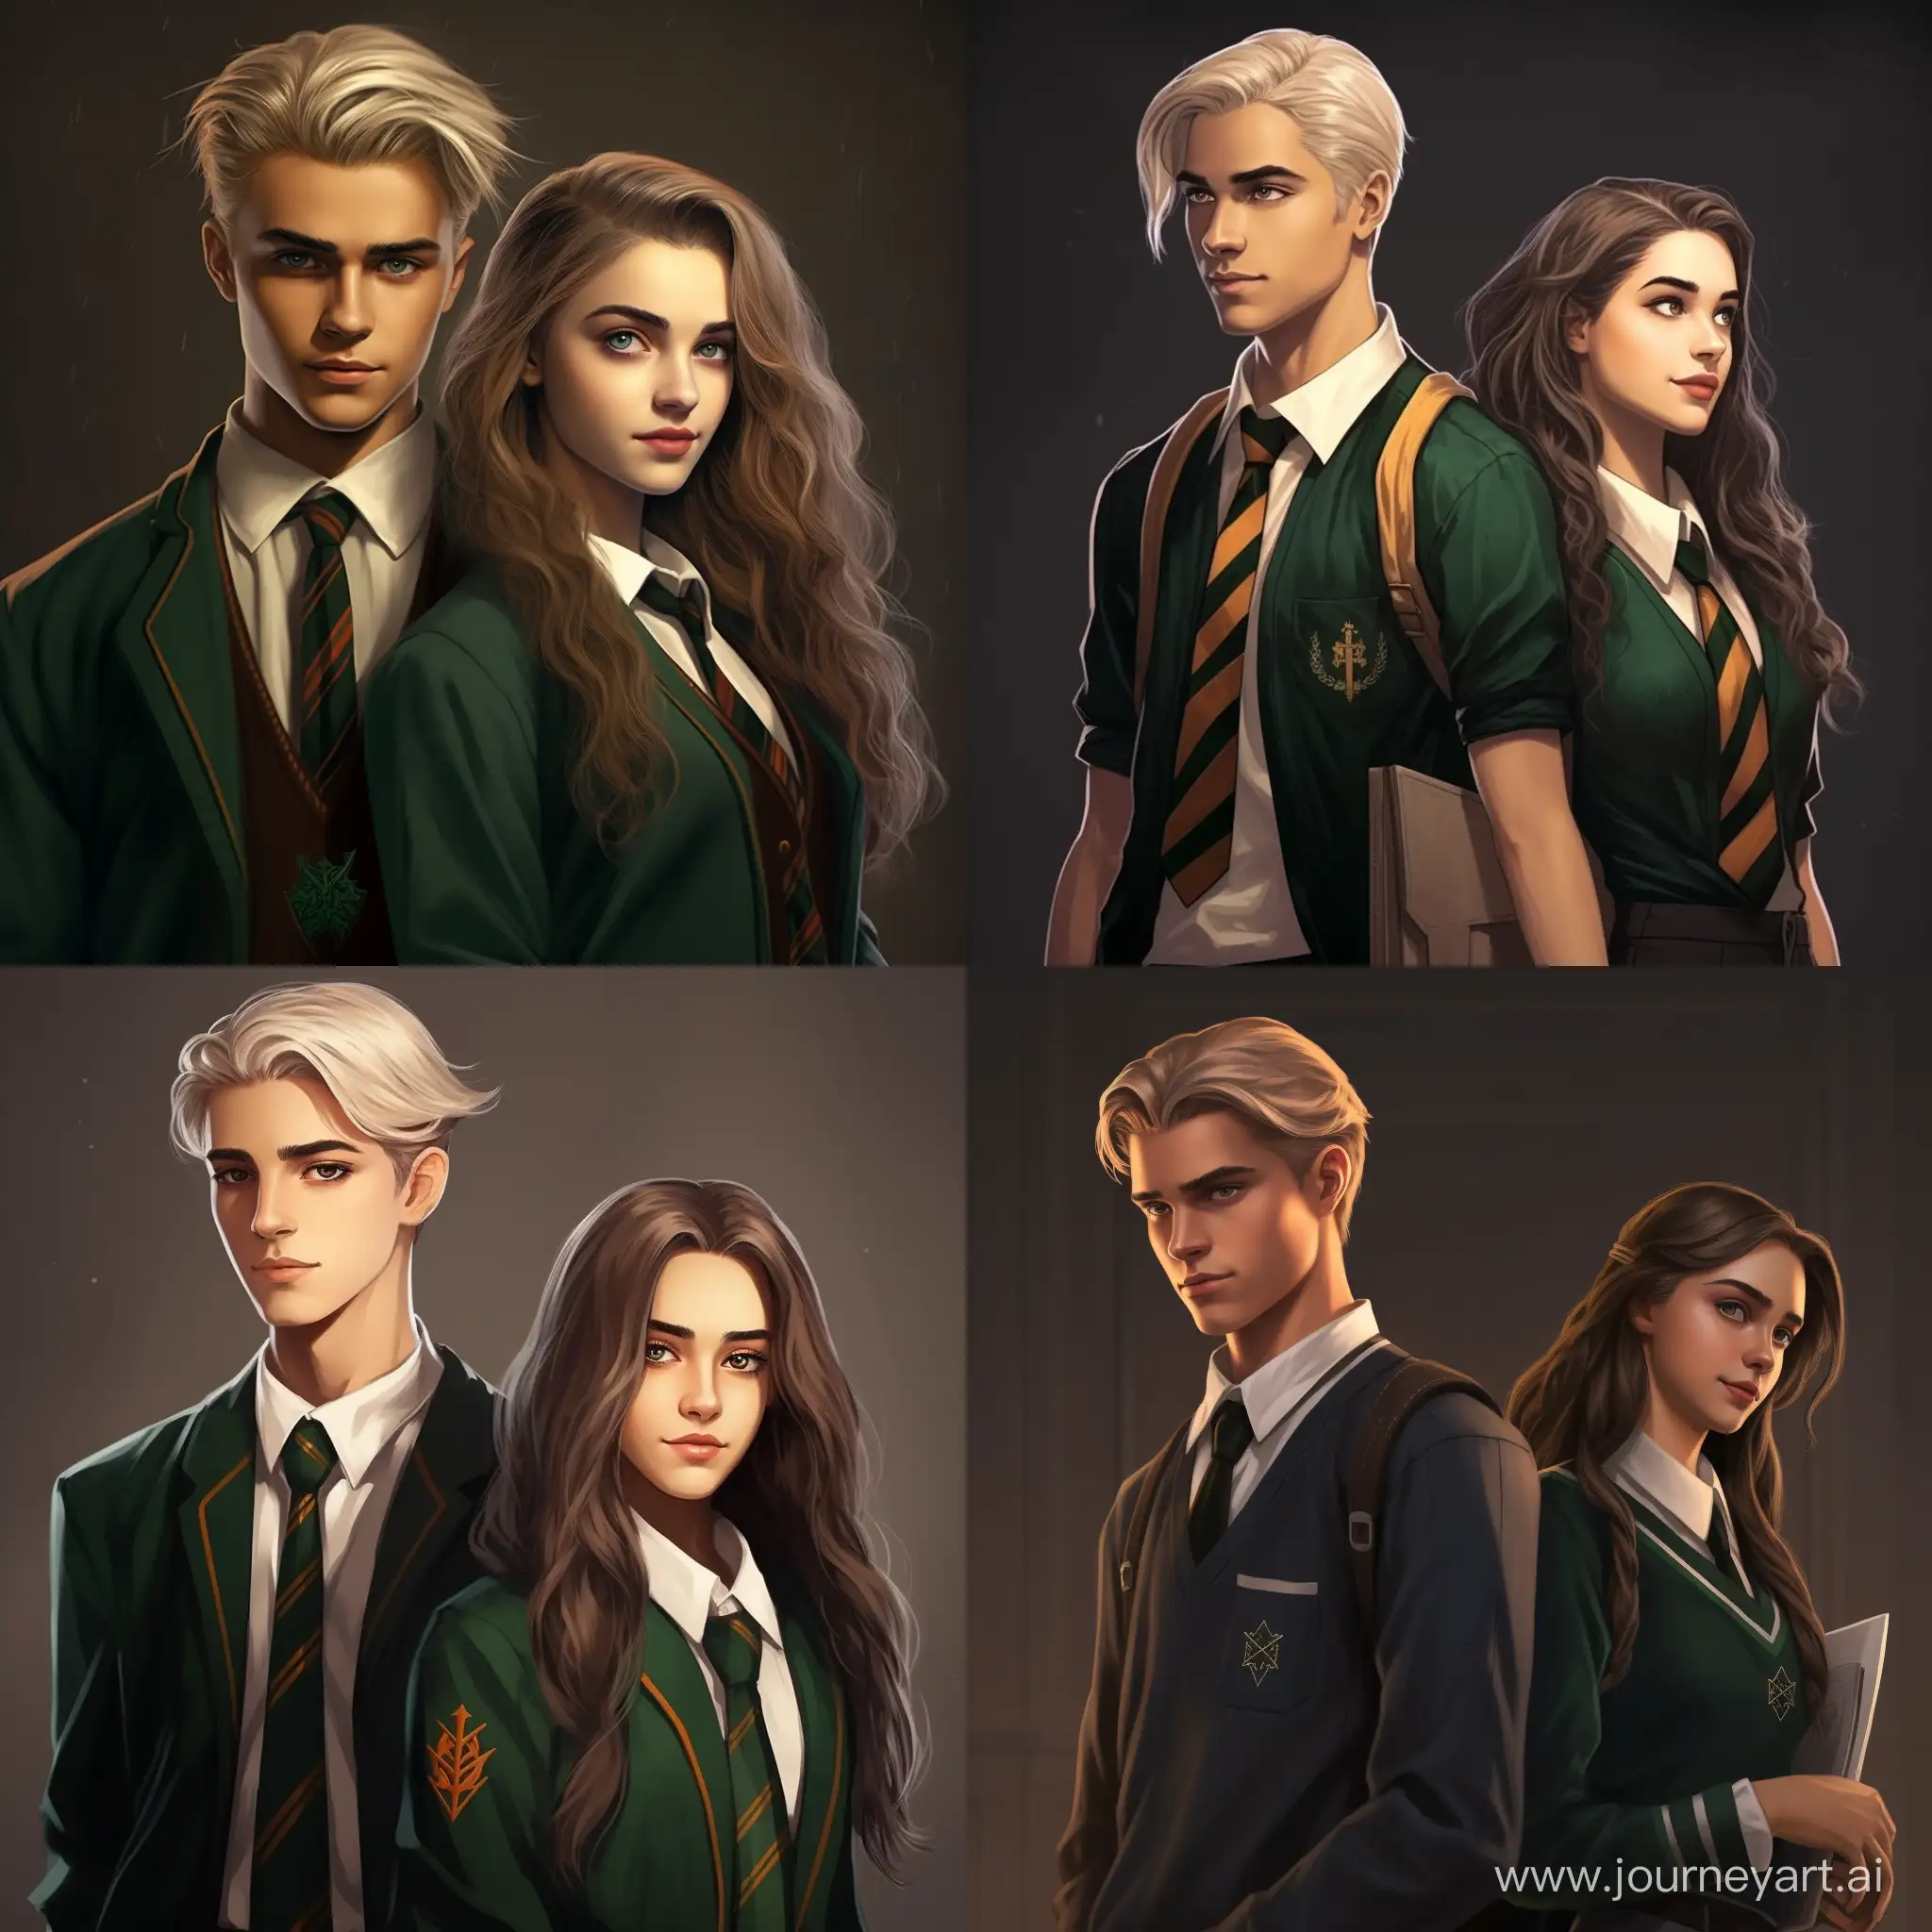 Draco Malfoy and Hermione Granger. Hermione is a brunette! They're at Hogwarts. Draco is wearing a Slytherin Quidditch uniform, and Hermione is wearing a school uniform